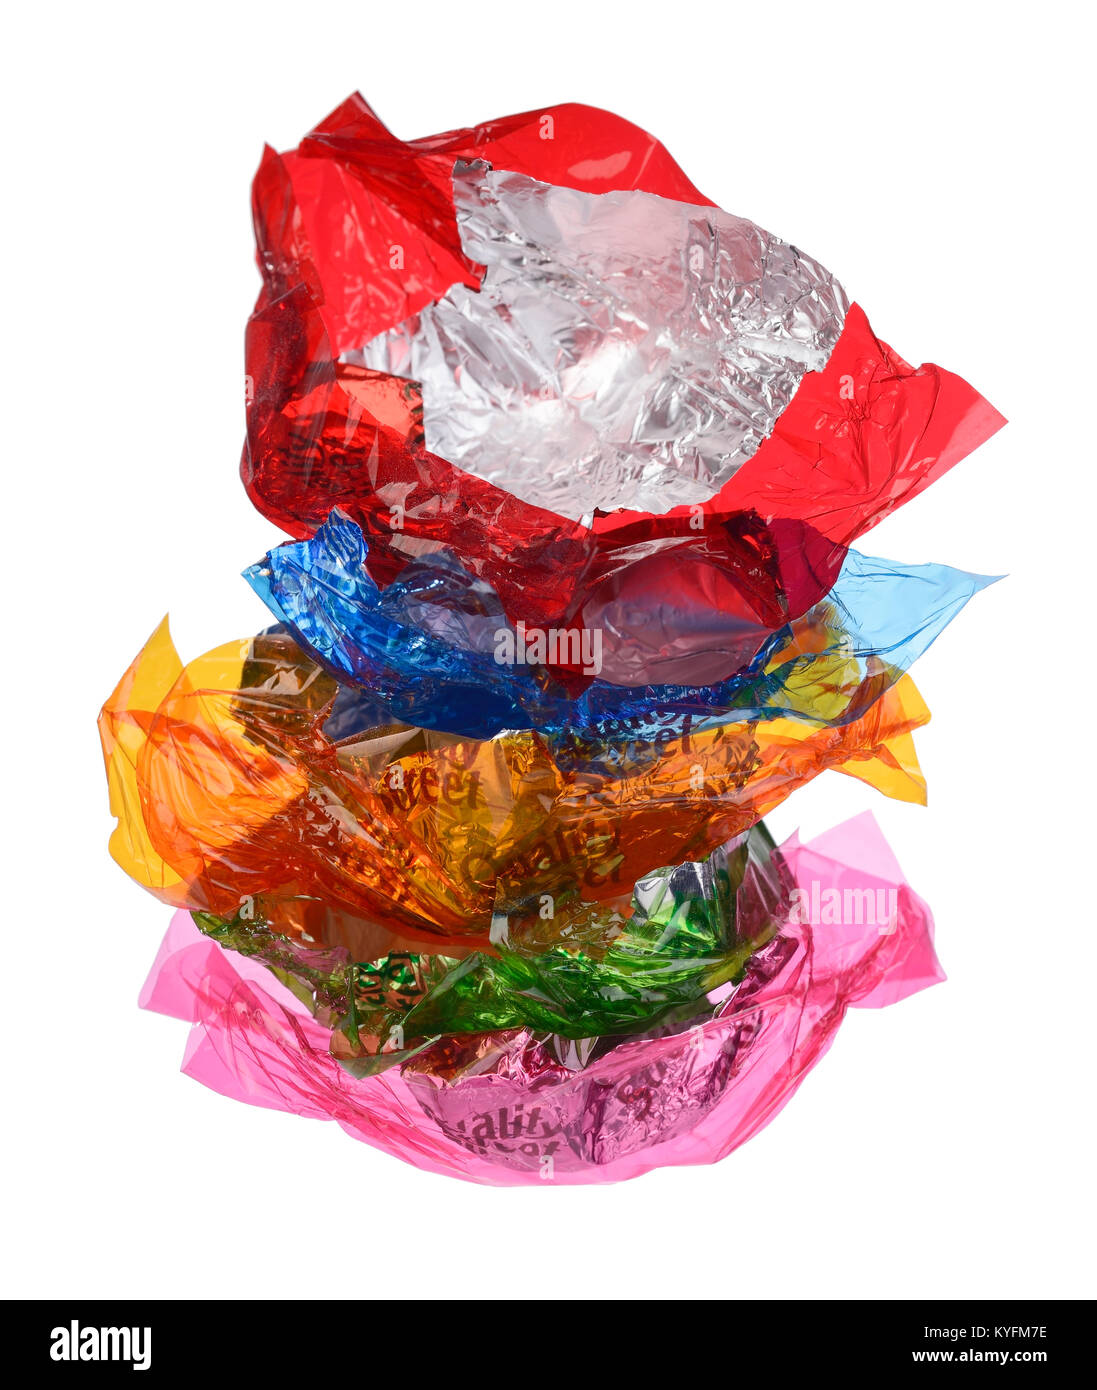 Pile of Quality Street sweet wrappers Stock Photo